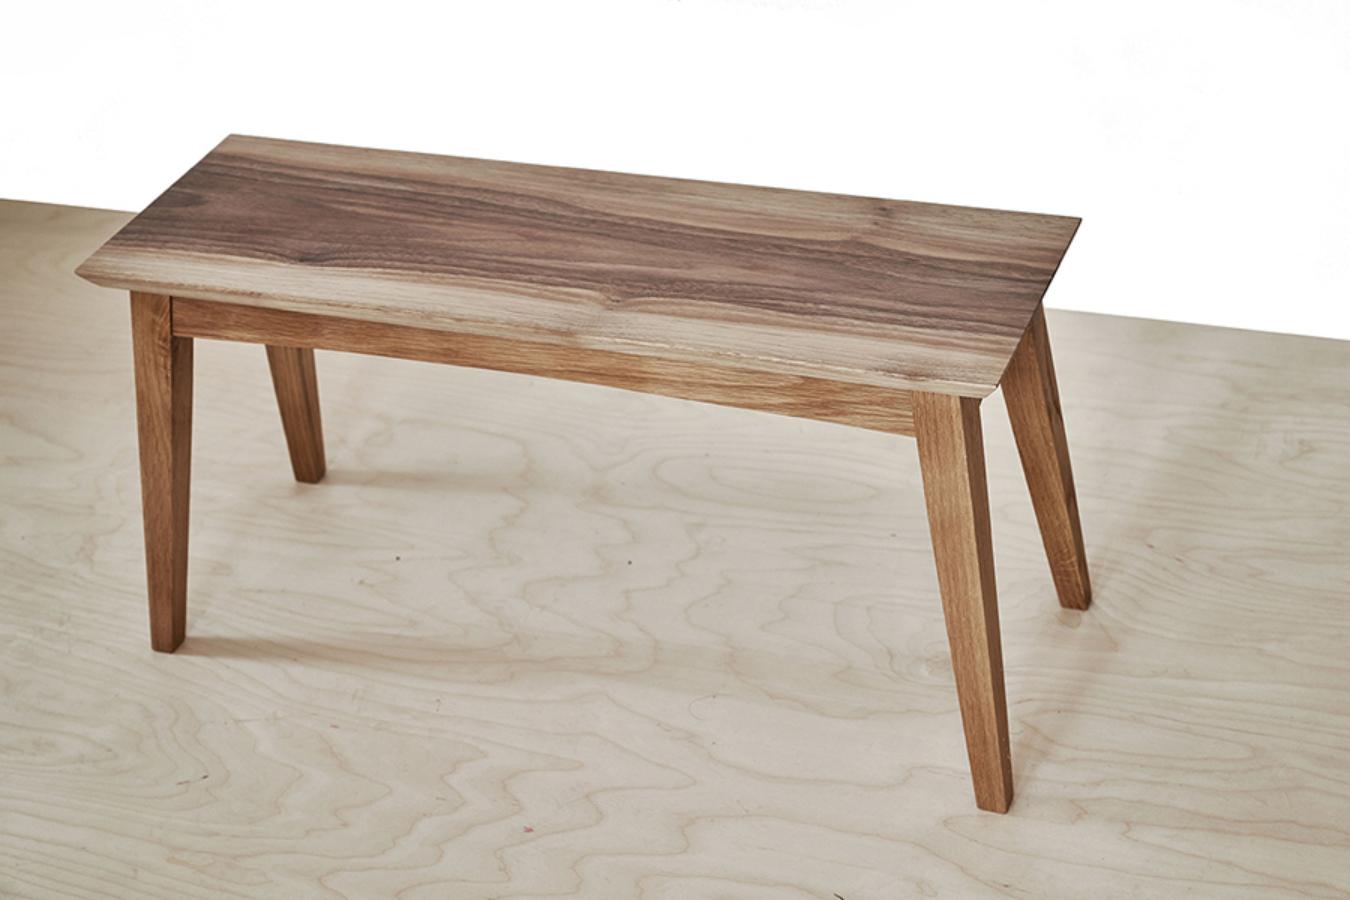 Classic bench 2 by Jean-Baptiste Van den Heede
Dimensions: L 82 x D 27 x H 40 cm
Materials: Oak.
Also Available: Other woods available.

Table or stool in walnut or solid oak and other woods on request. A very versatile and practical piece of